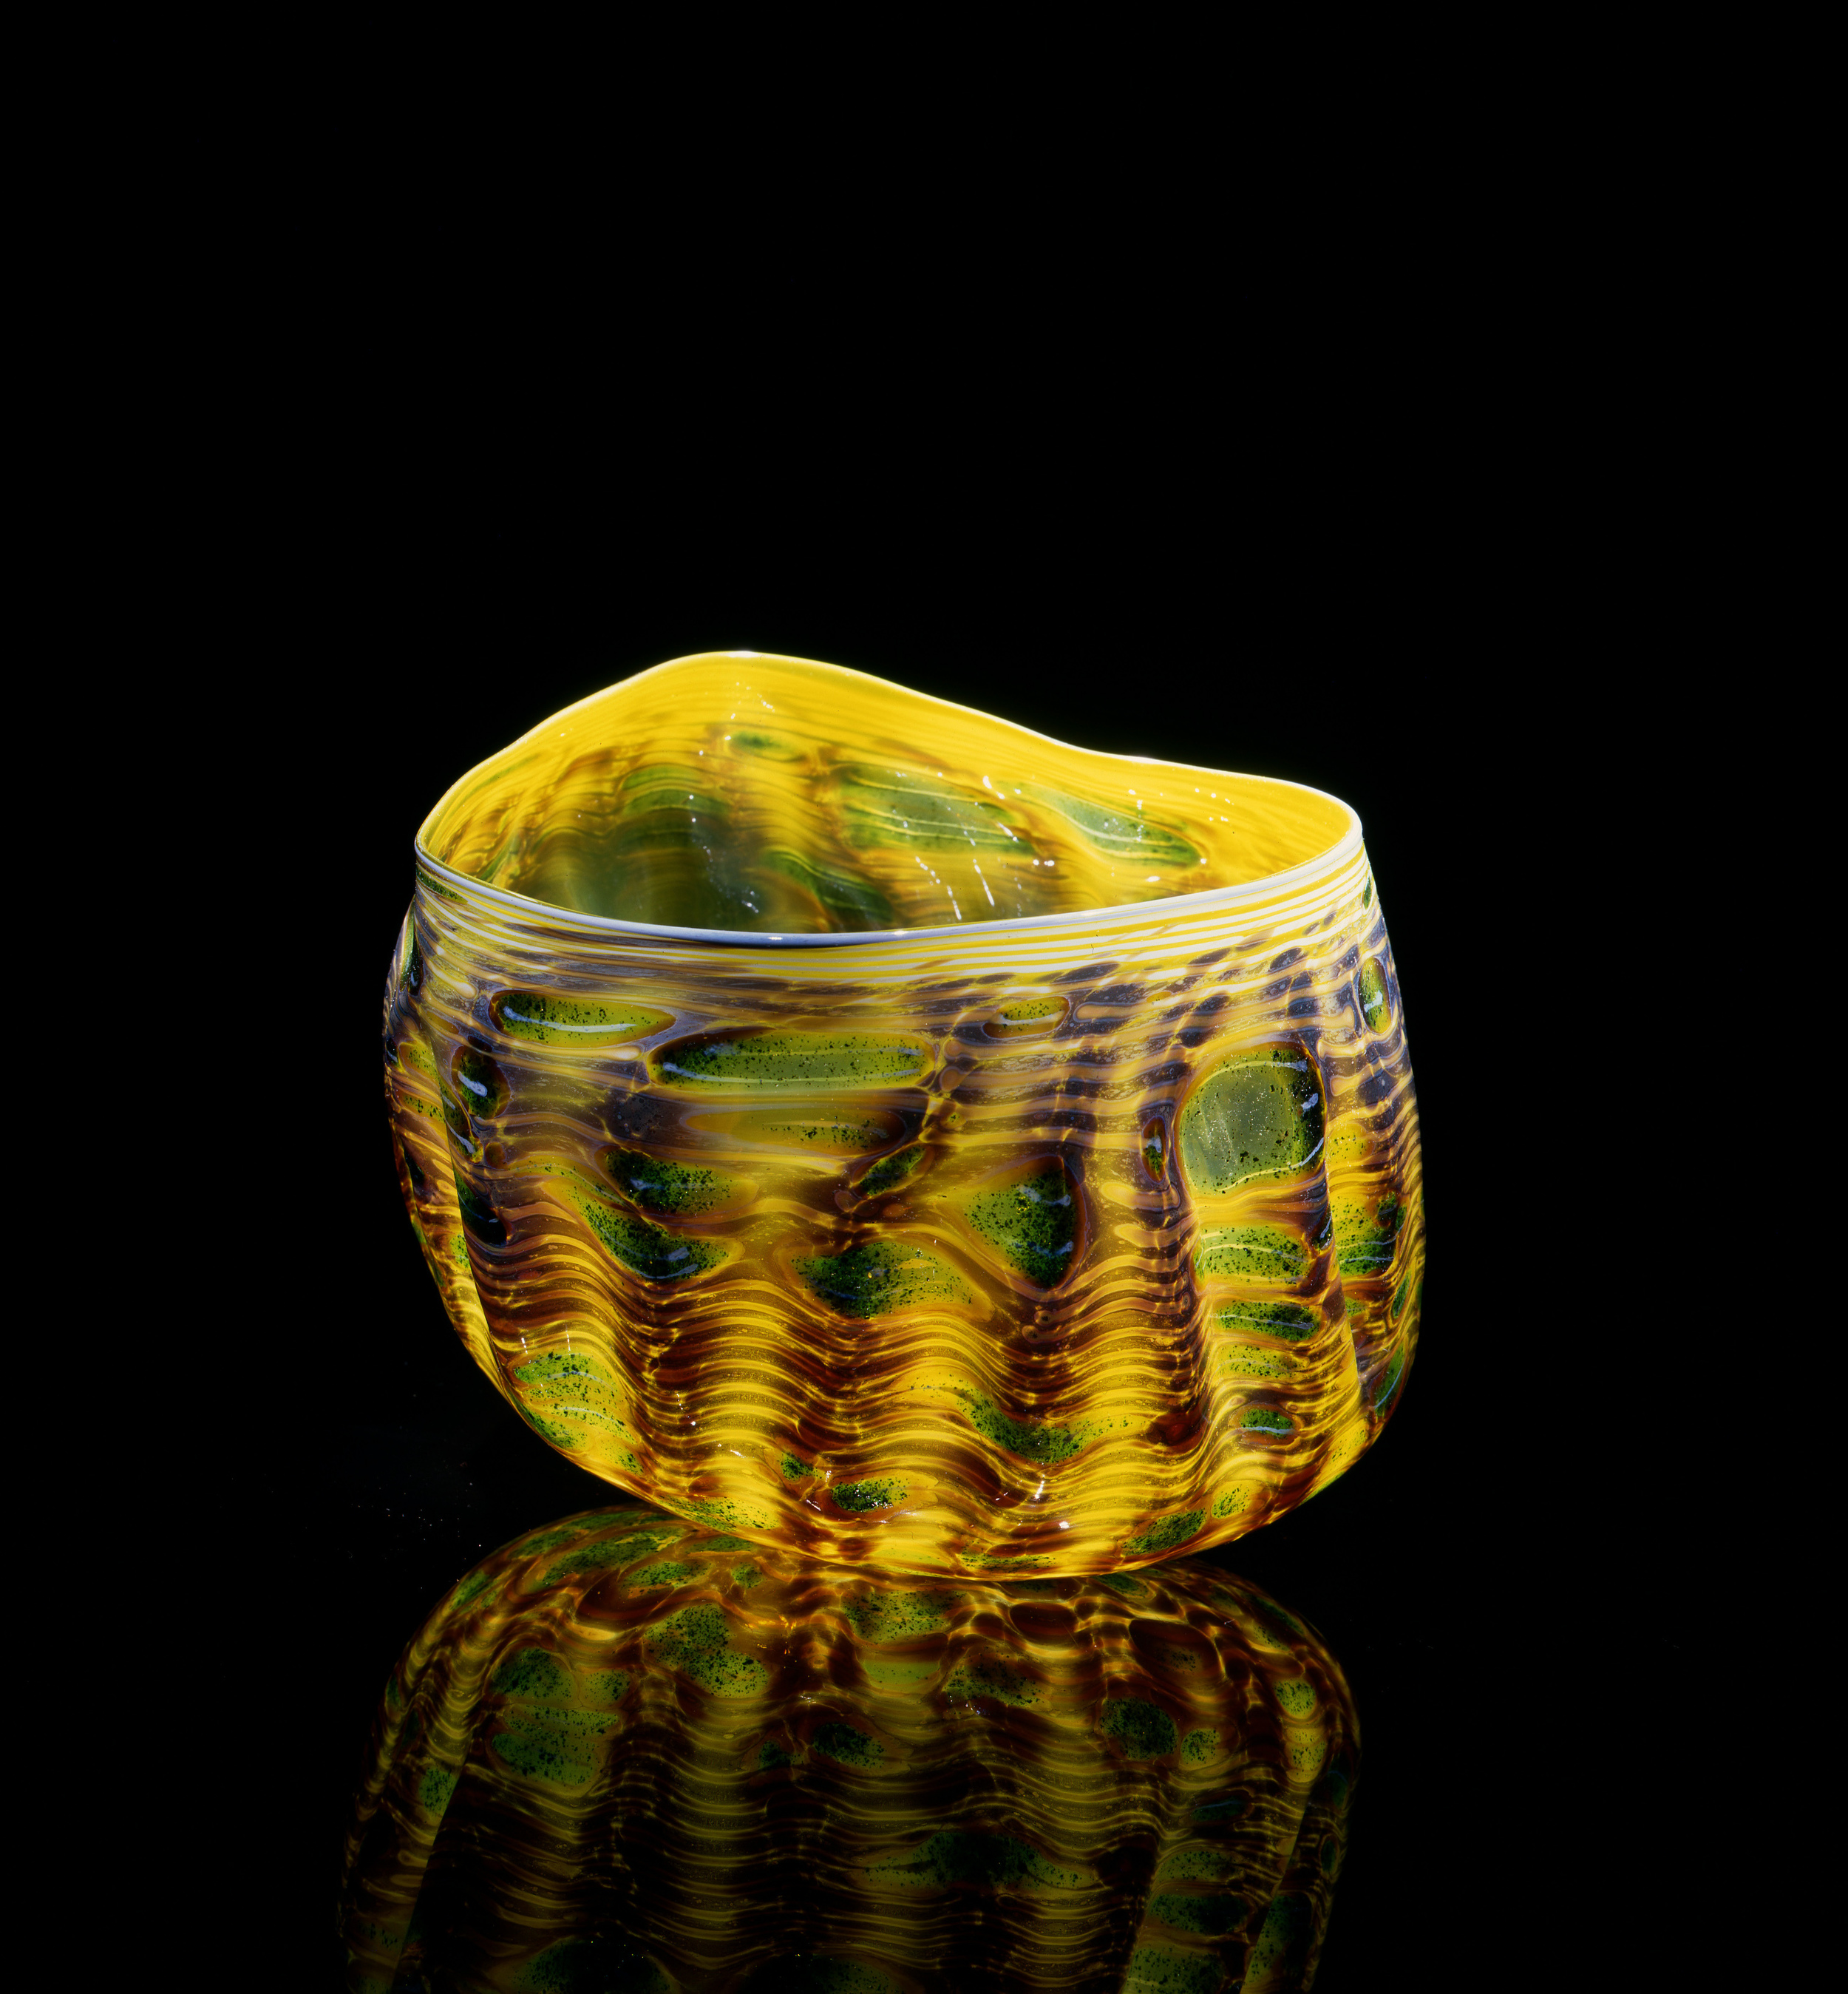  Dale Chihuly,&nbsp; Yellow Green Macchia with Teal Powder Lip Wrap&nbsp; (1981, glass, 7 x 8 x 8&nbsp;inches), DC.102 